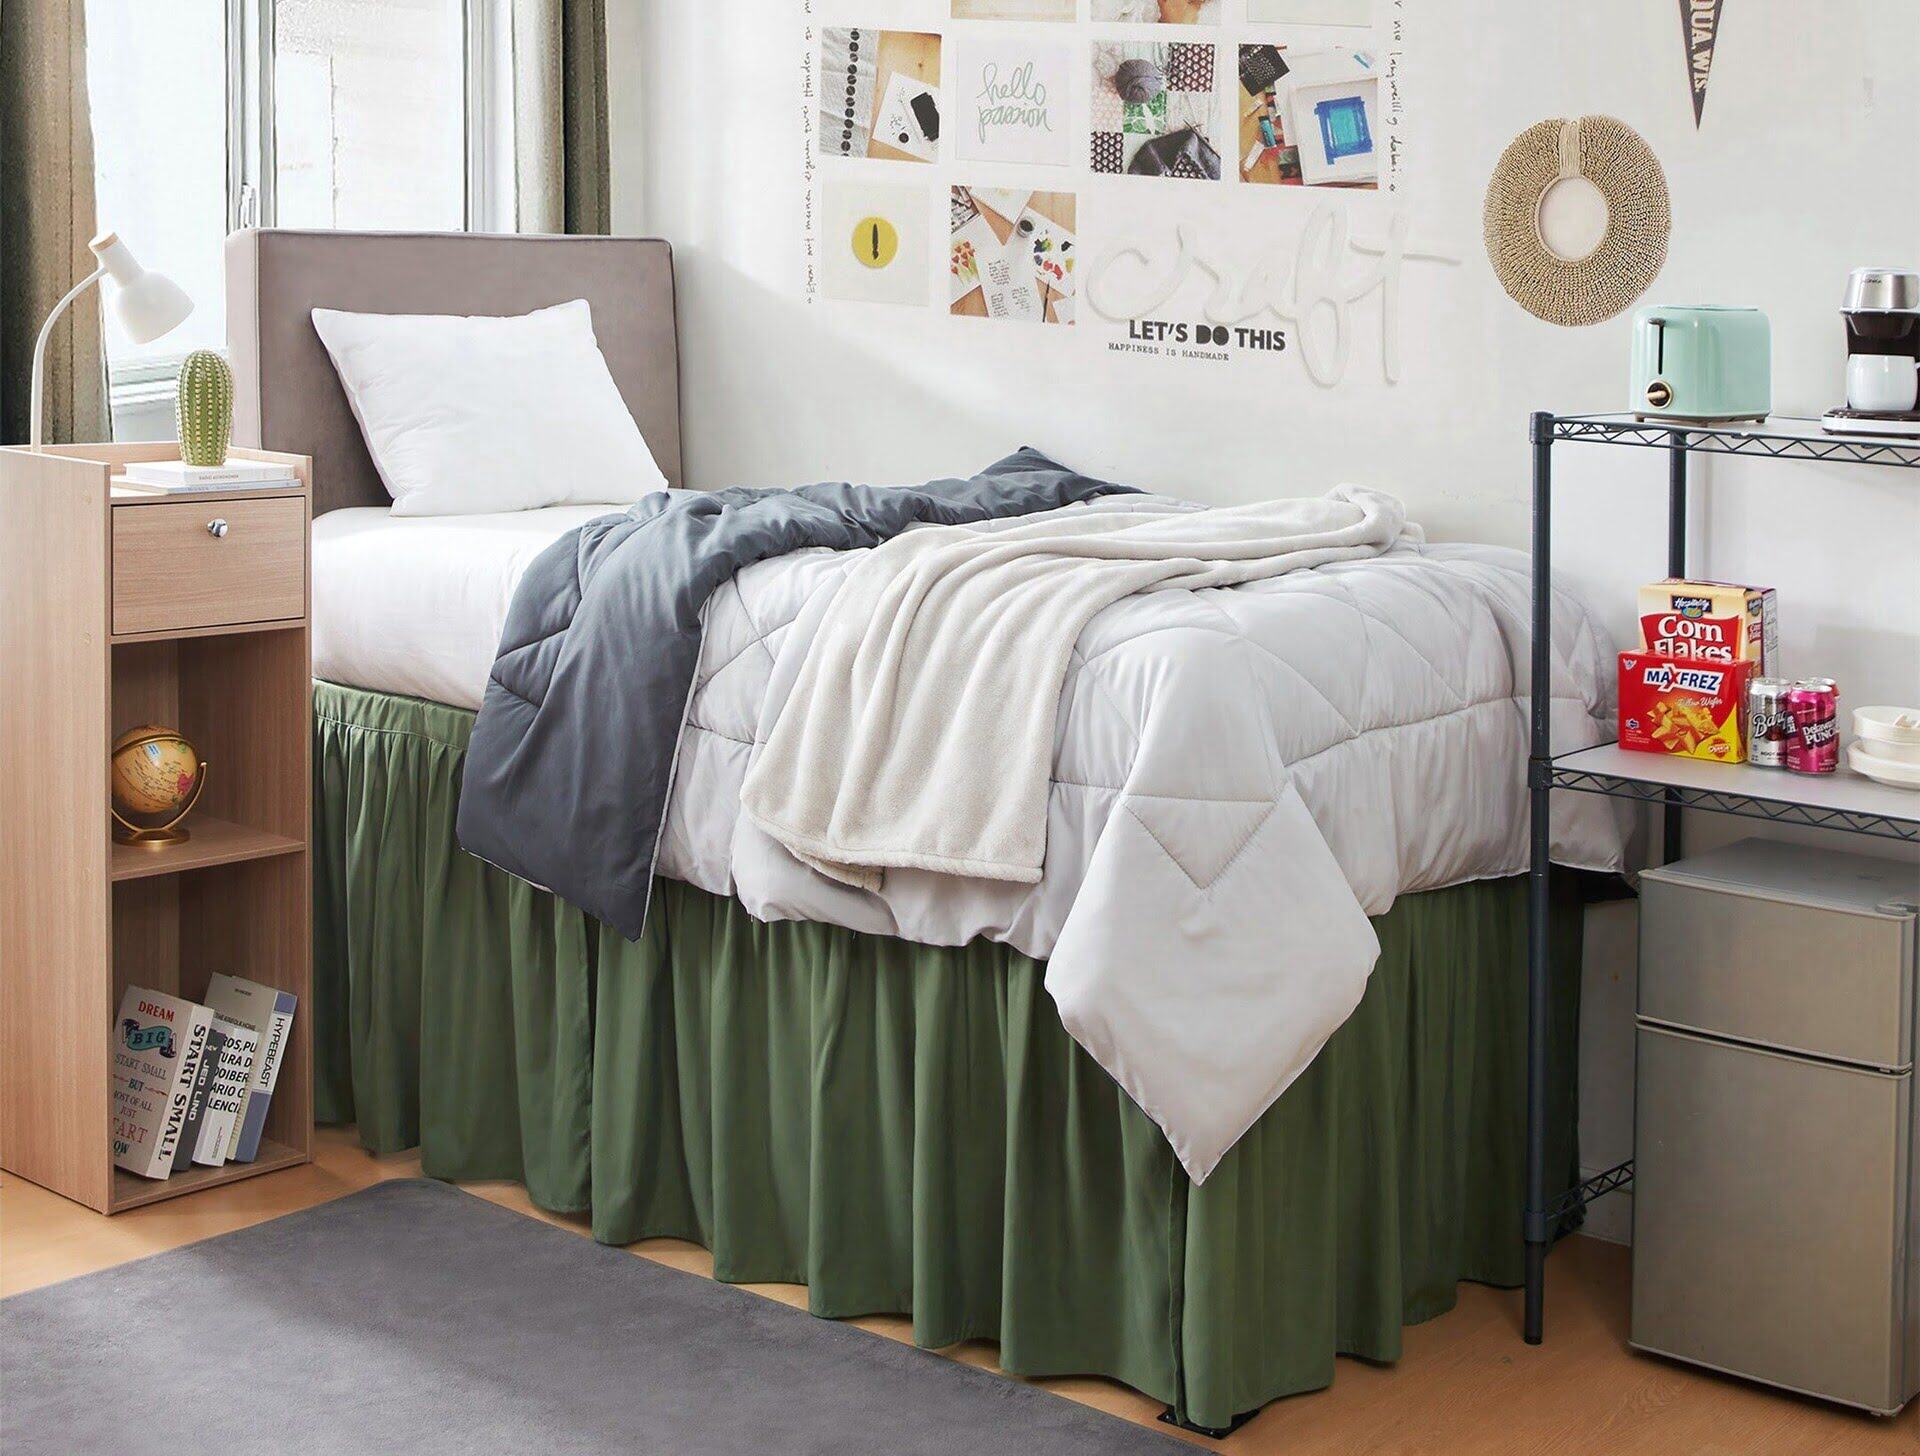 How To Make A Bed Skirt For Dorm Bed